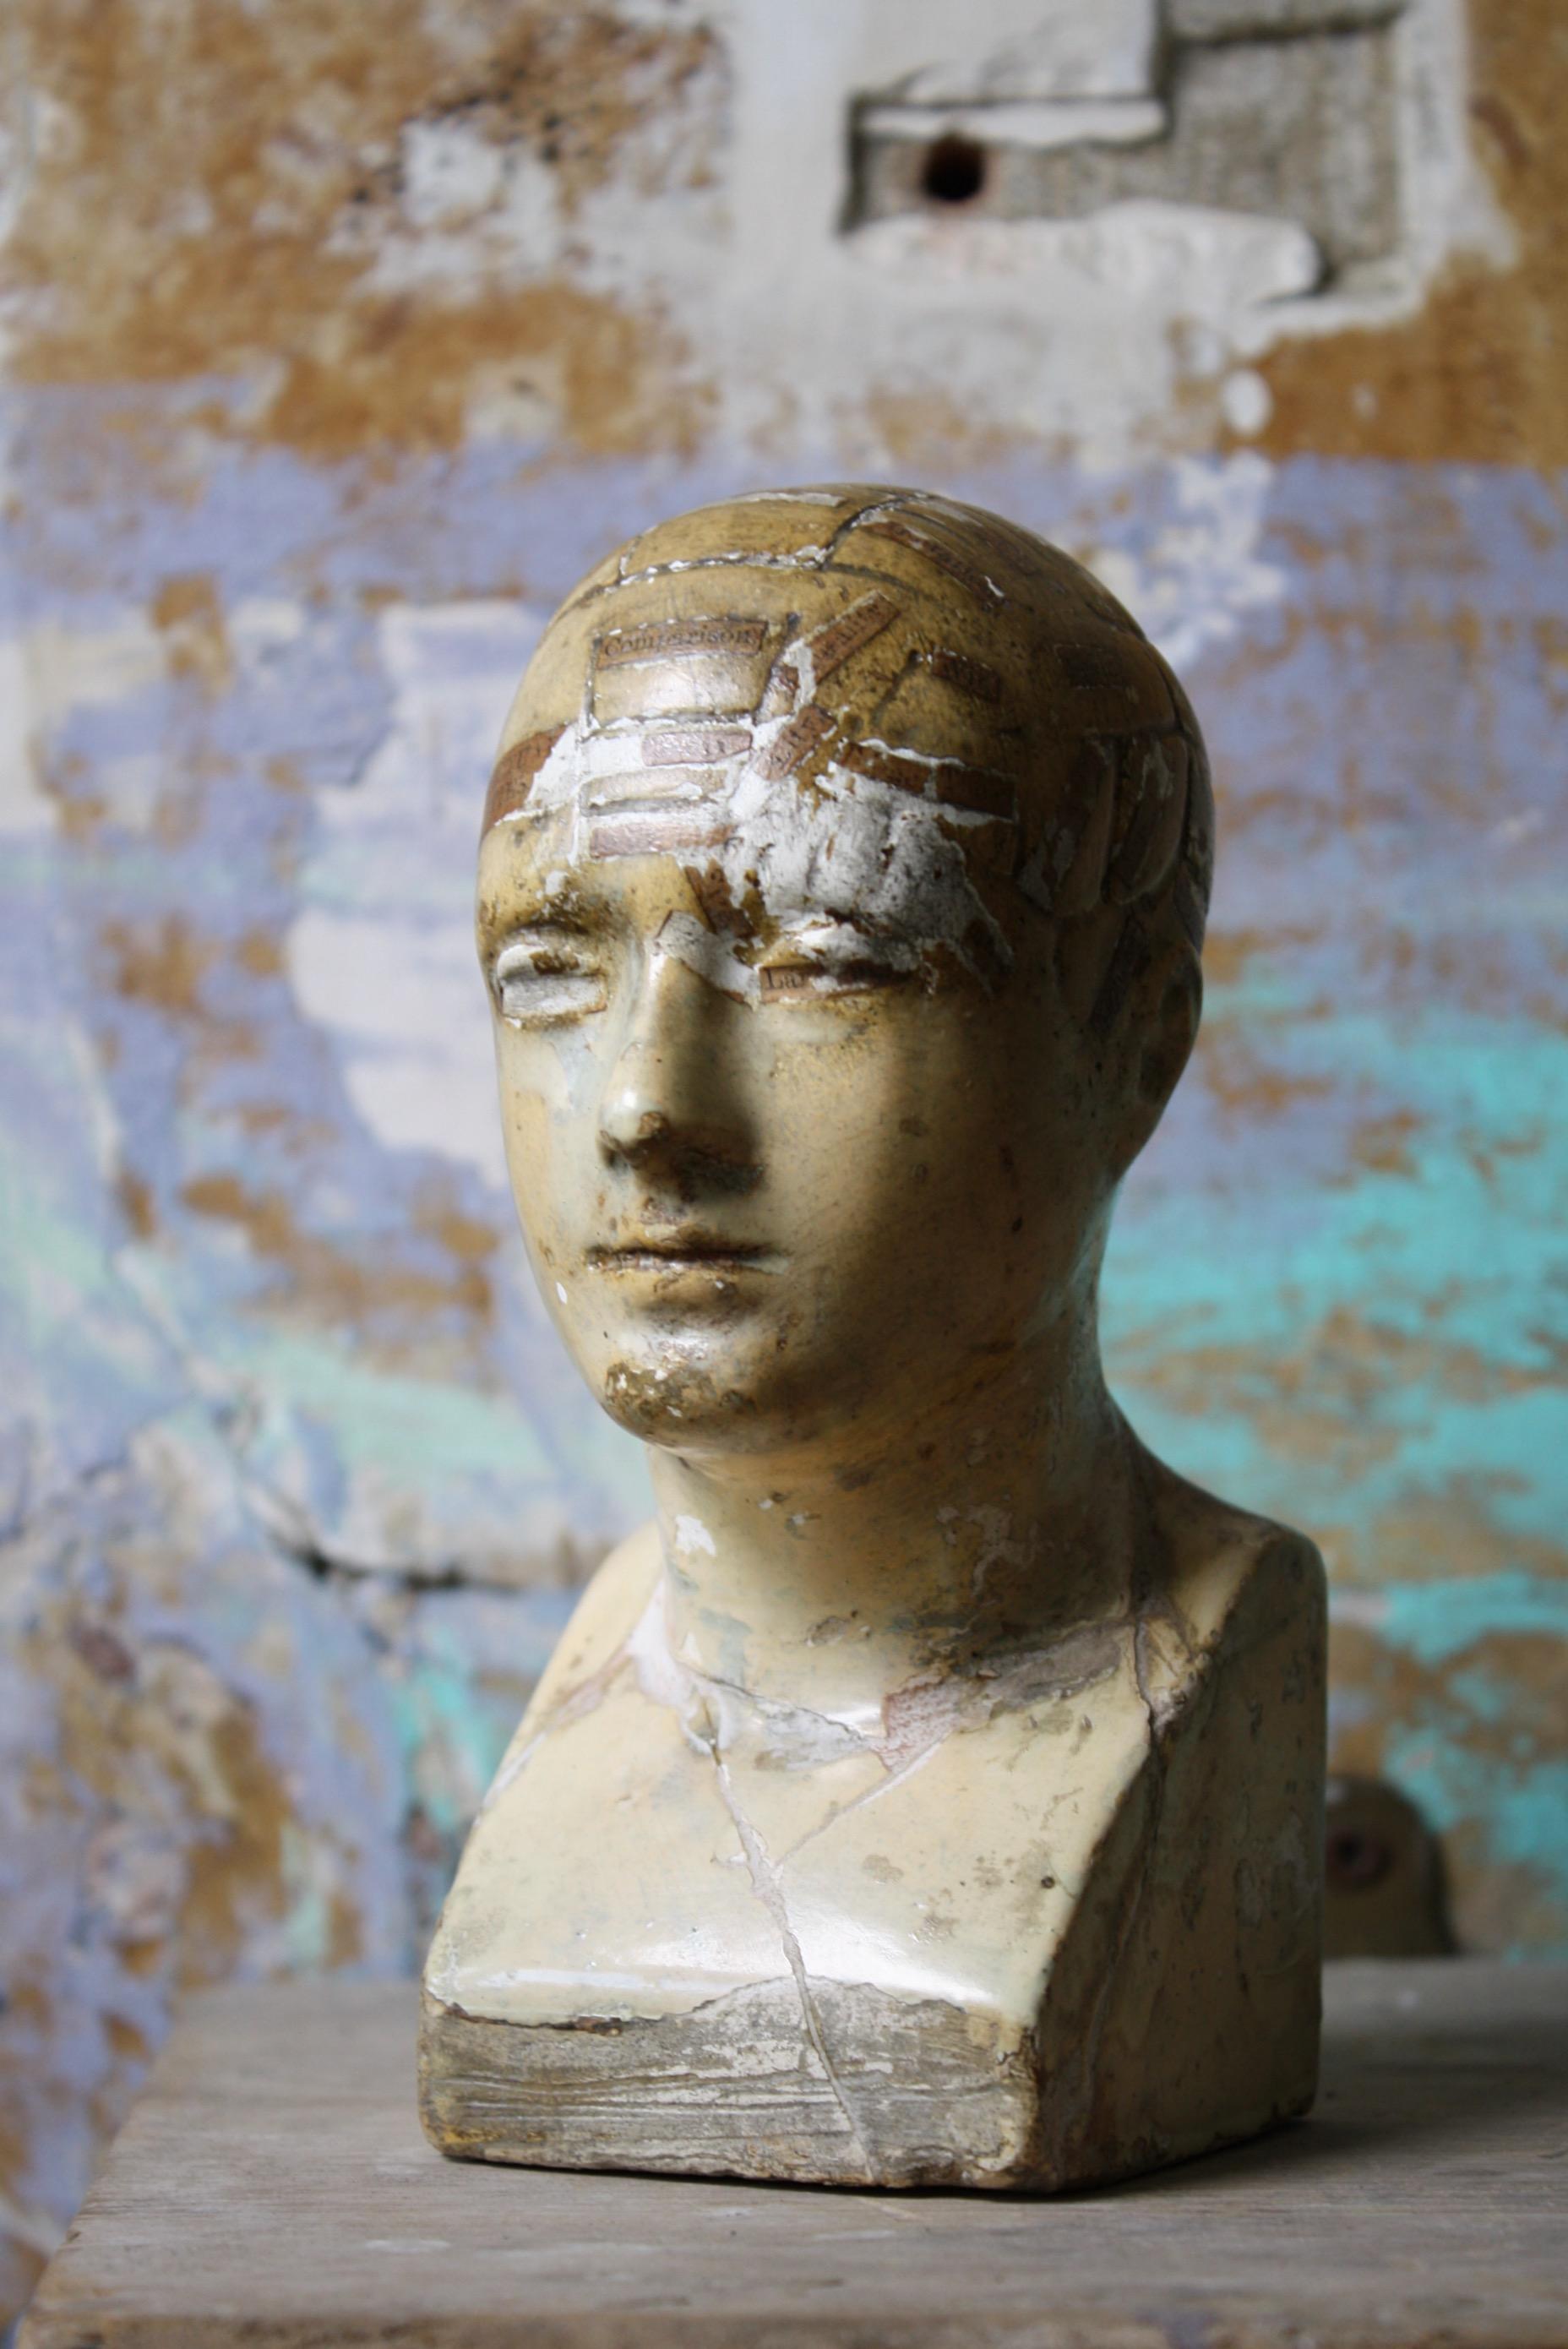 A tactile plaster cast phrenology head, primitively produced yet highly decorative and a obvious rare survivor. A inscribed label of the maker Vago along with the date 1869 

A handful of the original paper labels have gone astray over the years,